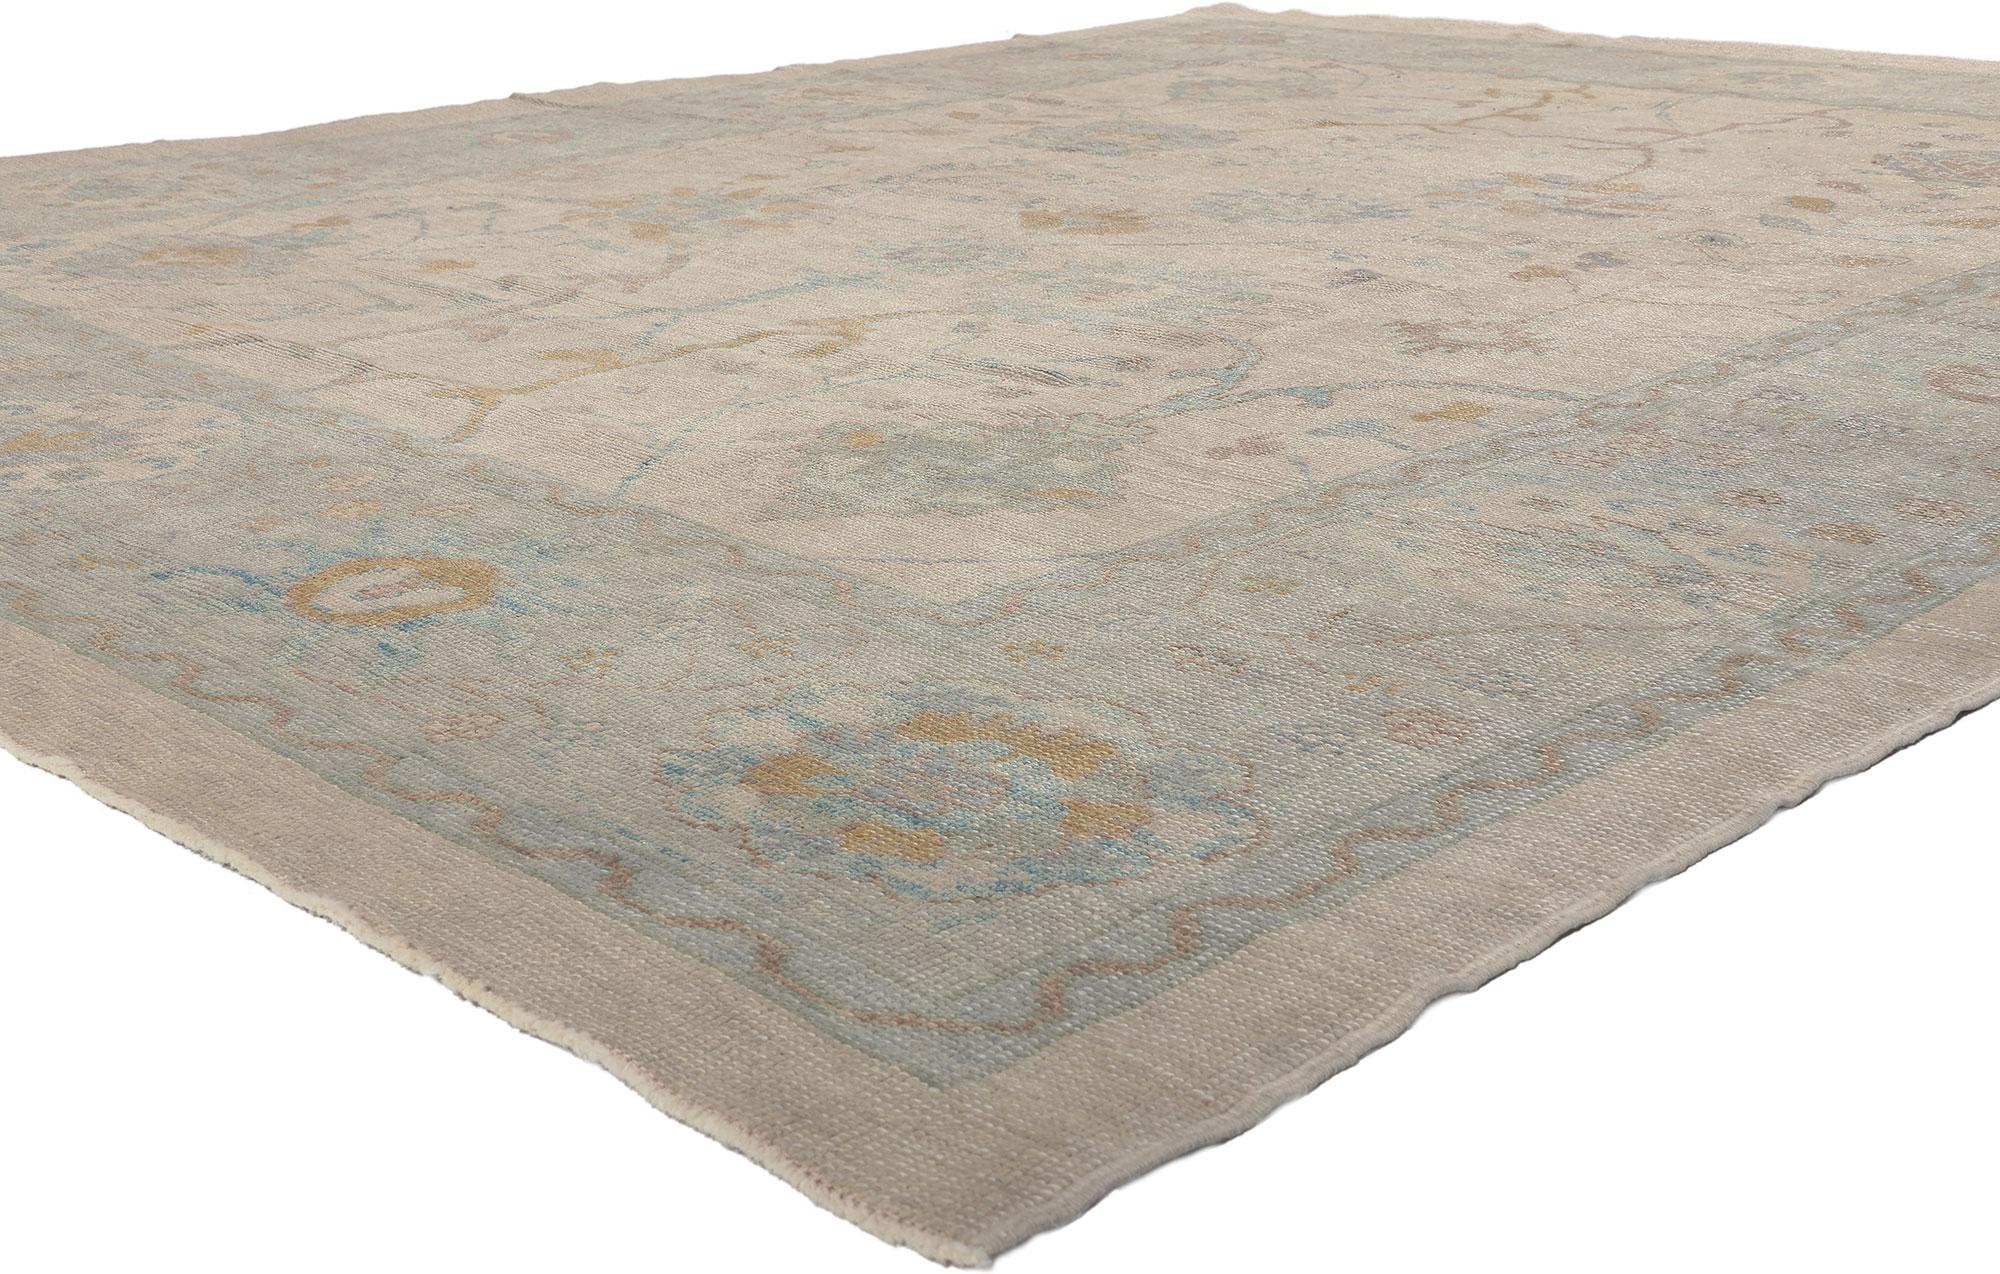 53612 Modern Oushak Turkish Rug, 09'08 x 12'03.
Biophilic Design meets quiet luxury in this hand-knotted wool modern Turkish Oushak rug. The nature-inspired design and soft earthy hues woven into this piece work together creating a natural and